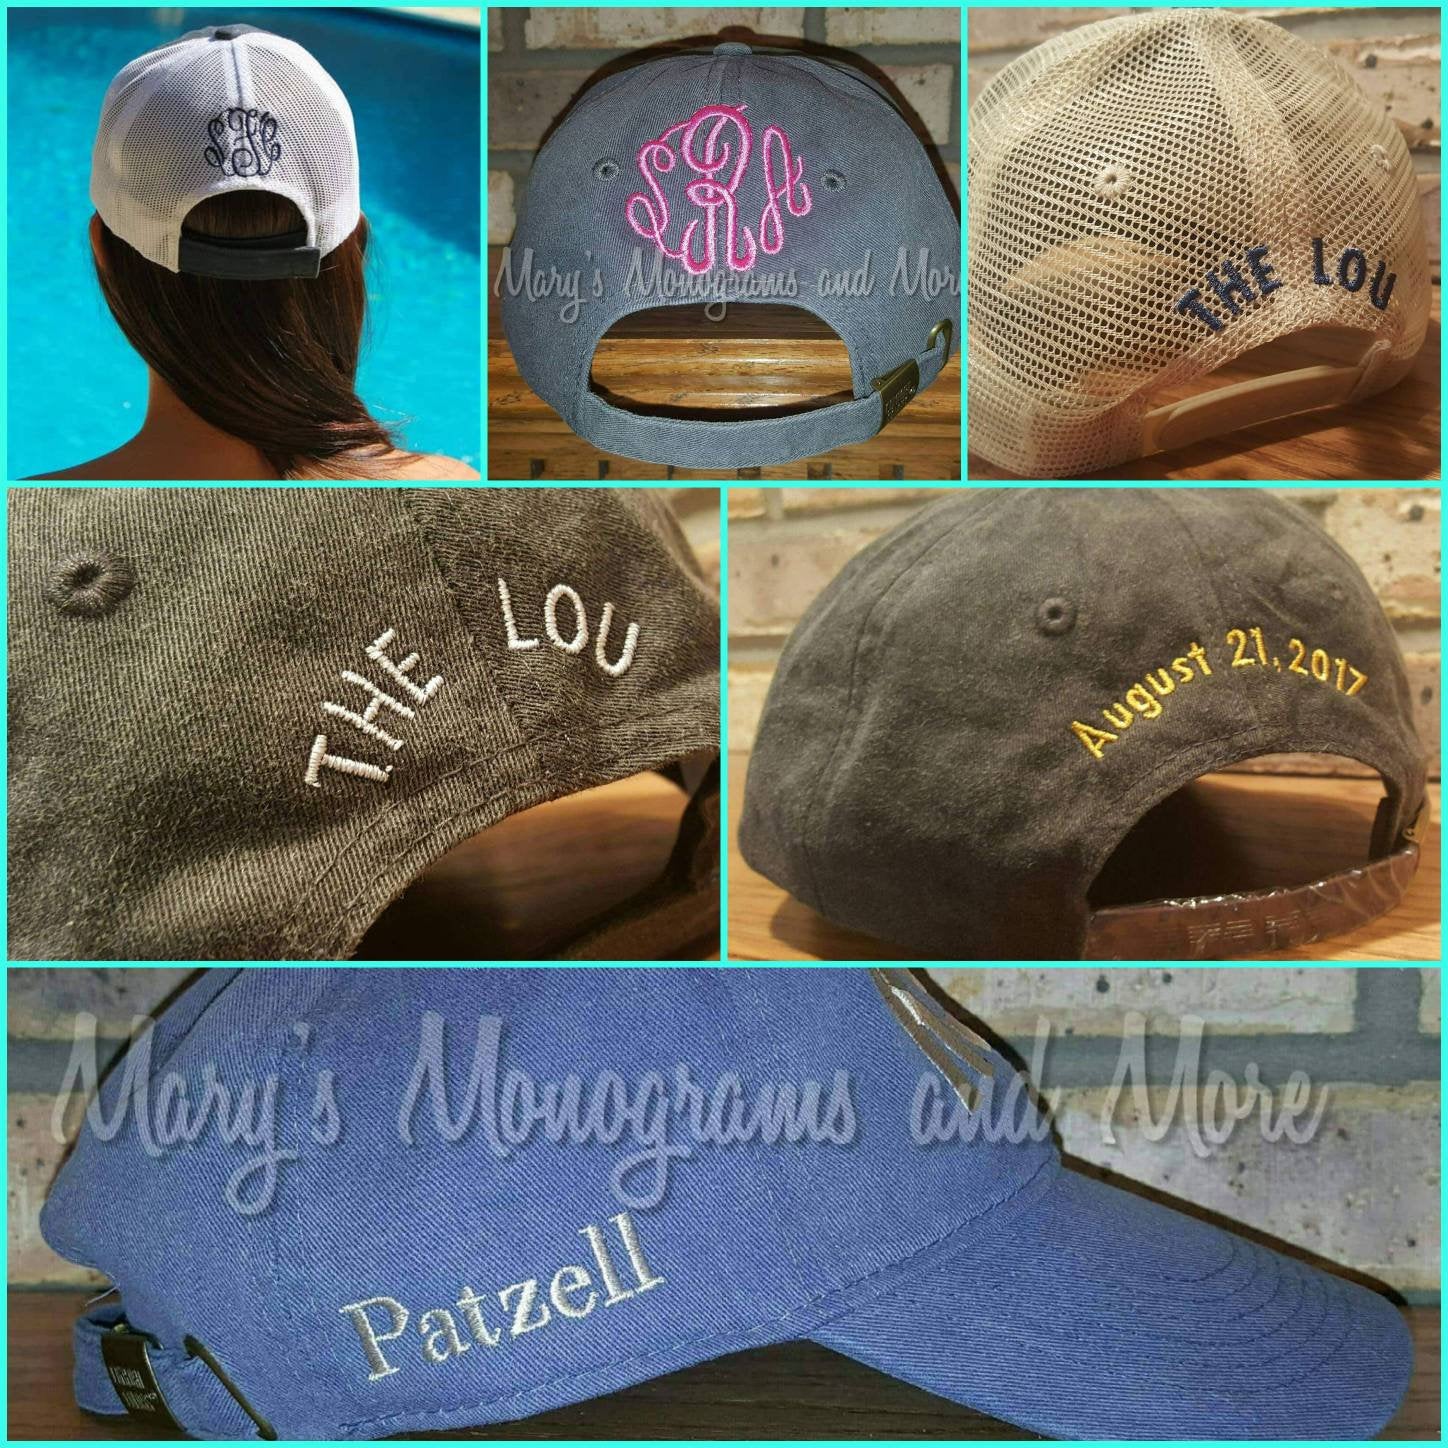 Good Vibes and High Tides Hat - Embroidered Beach, Summer Vacation, Girls Trip, I'll Bring The Alcohol, Bad Decisions, Drinking, Party Hat